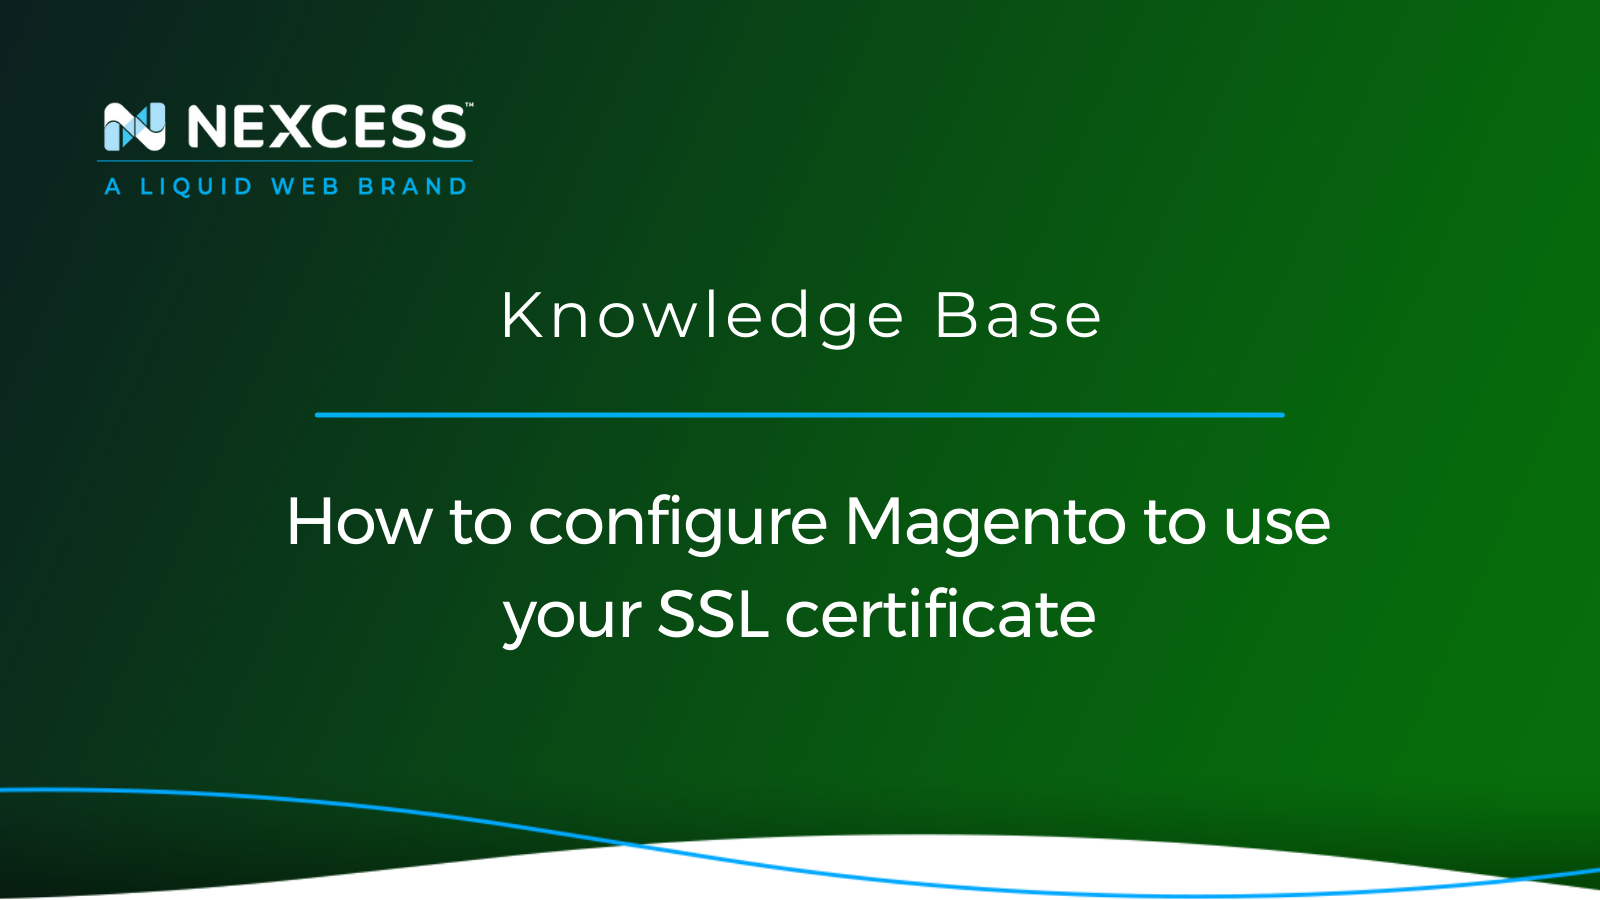 How to configure Magento to use your SSL certificate